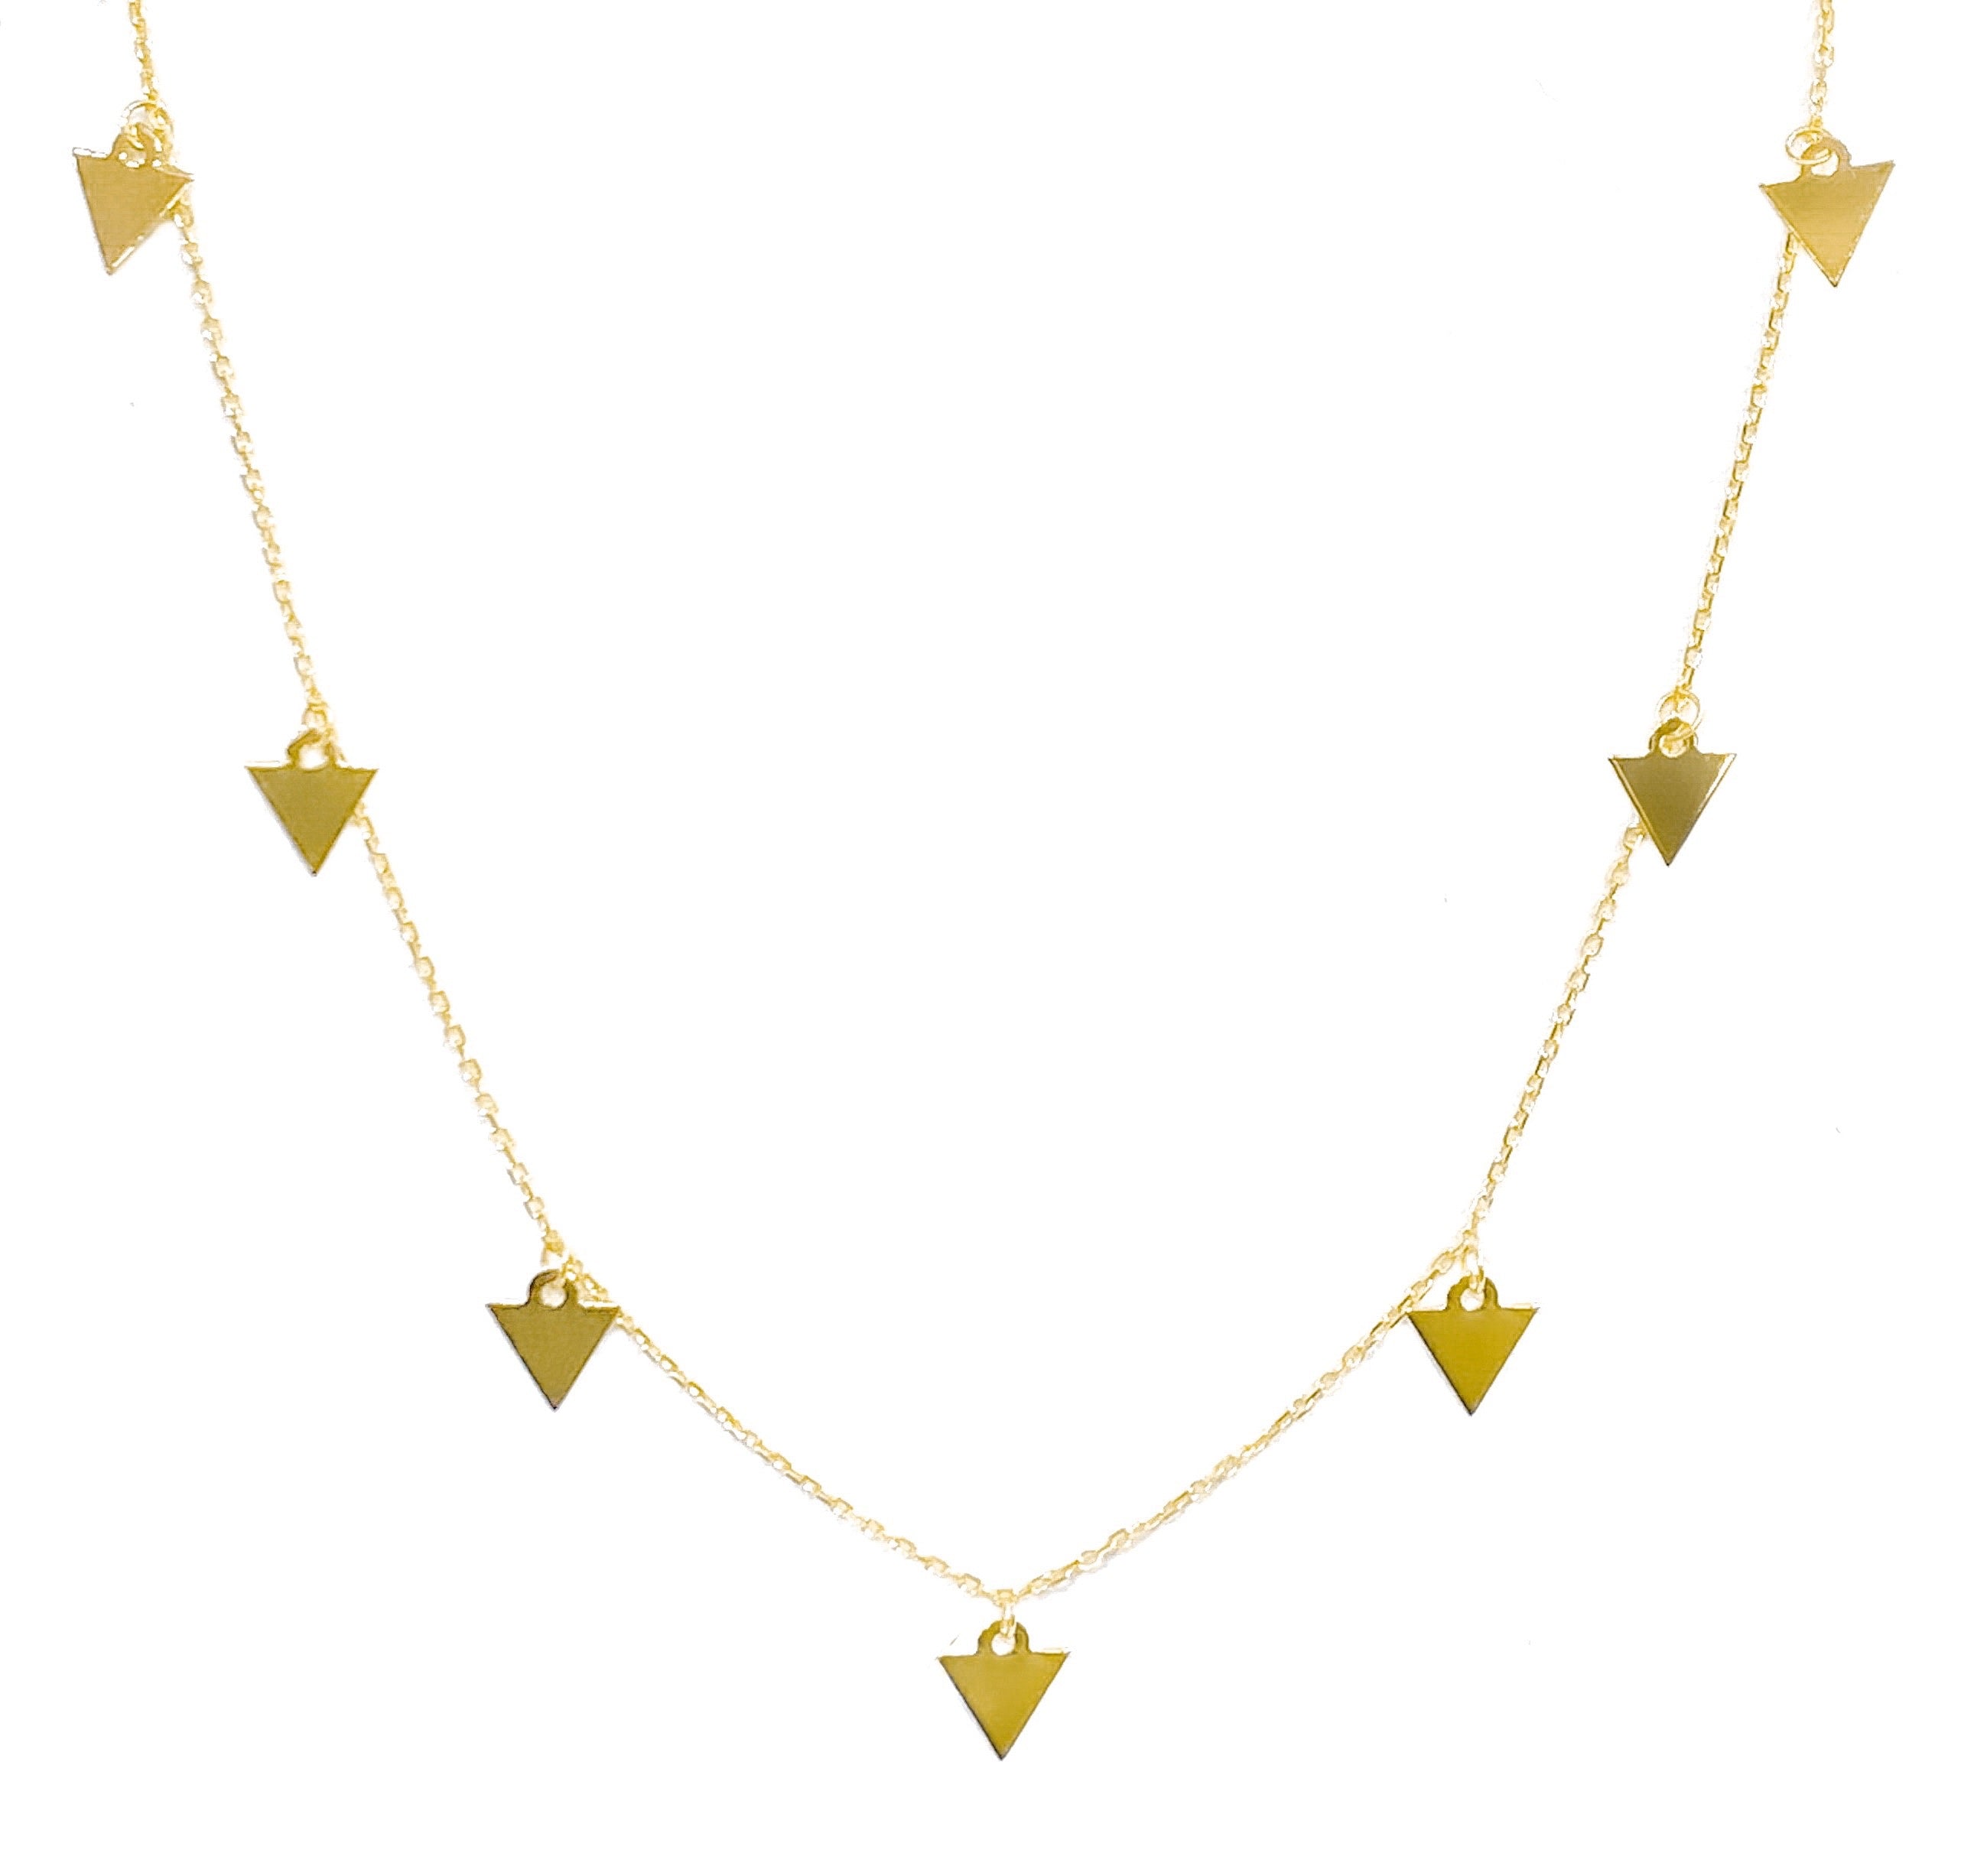 14K YELLOW GOLD DANGLING TRIANGLE NECKLACE